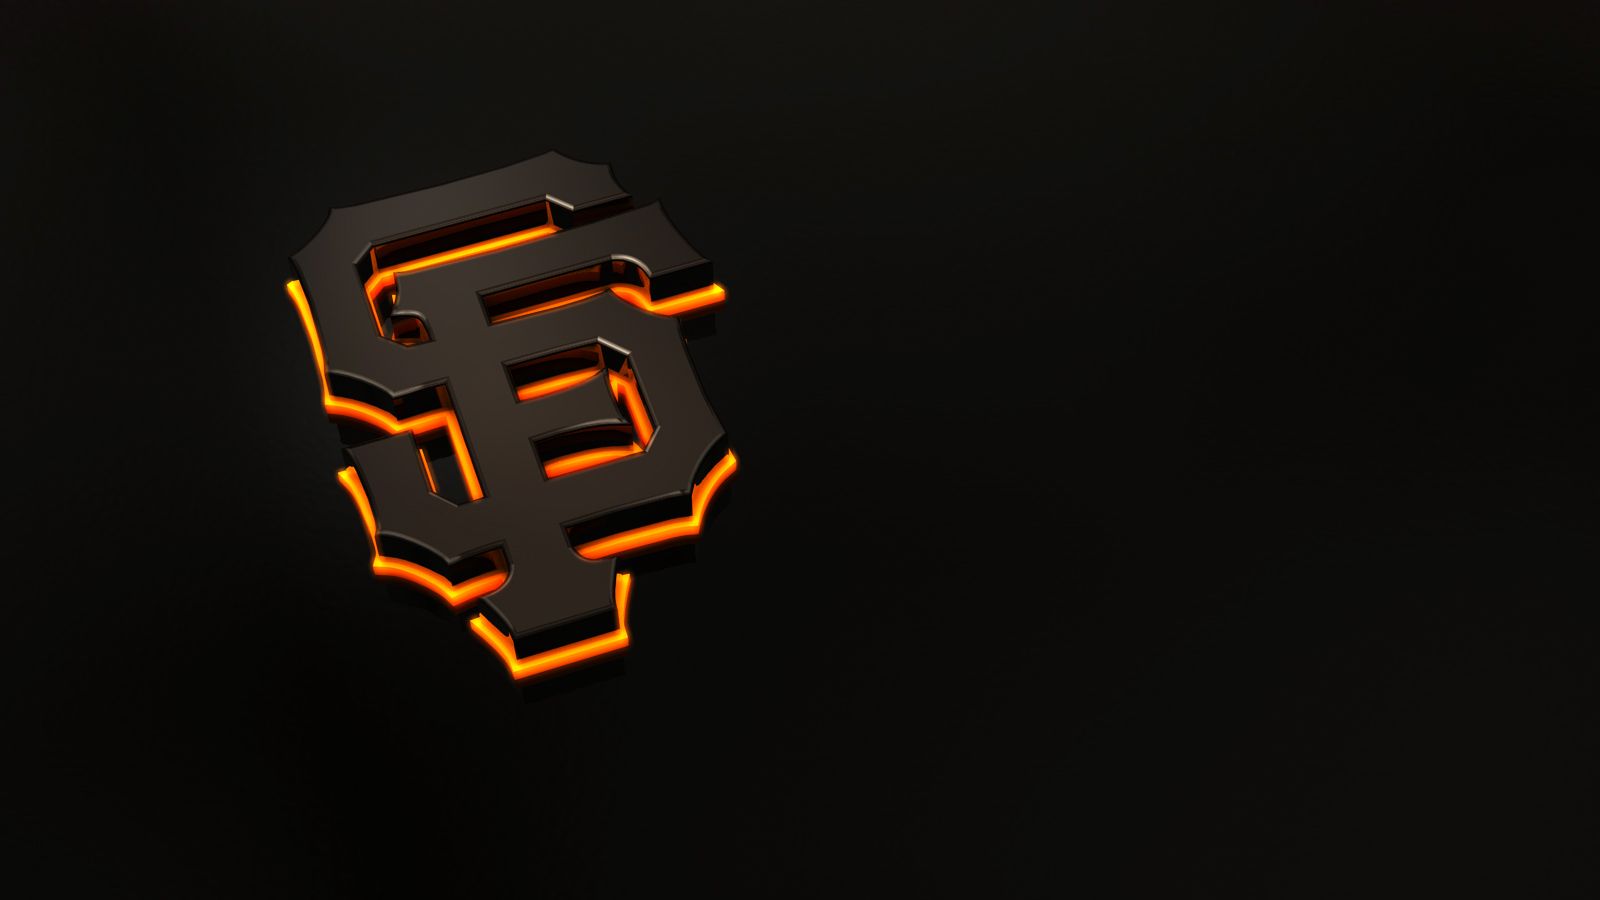 4 San Francisco Giants HD Wallpapers Backgrounds - Wallpaper Abyss